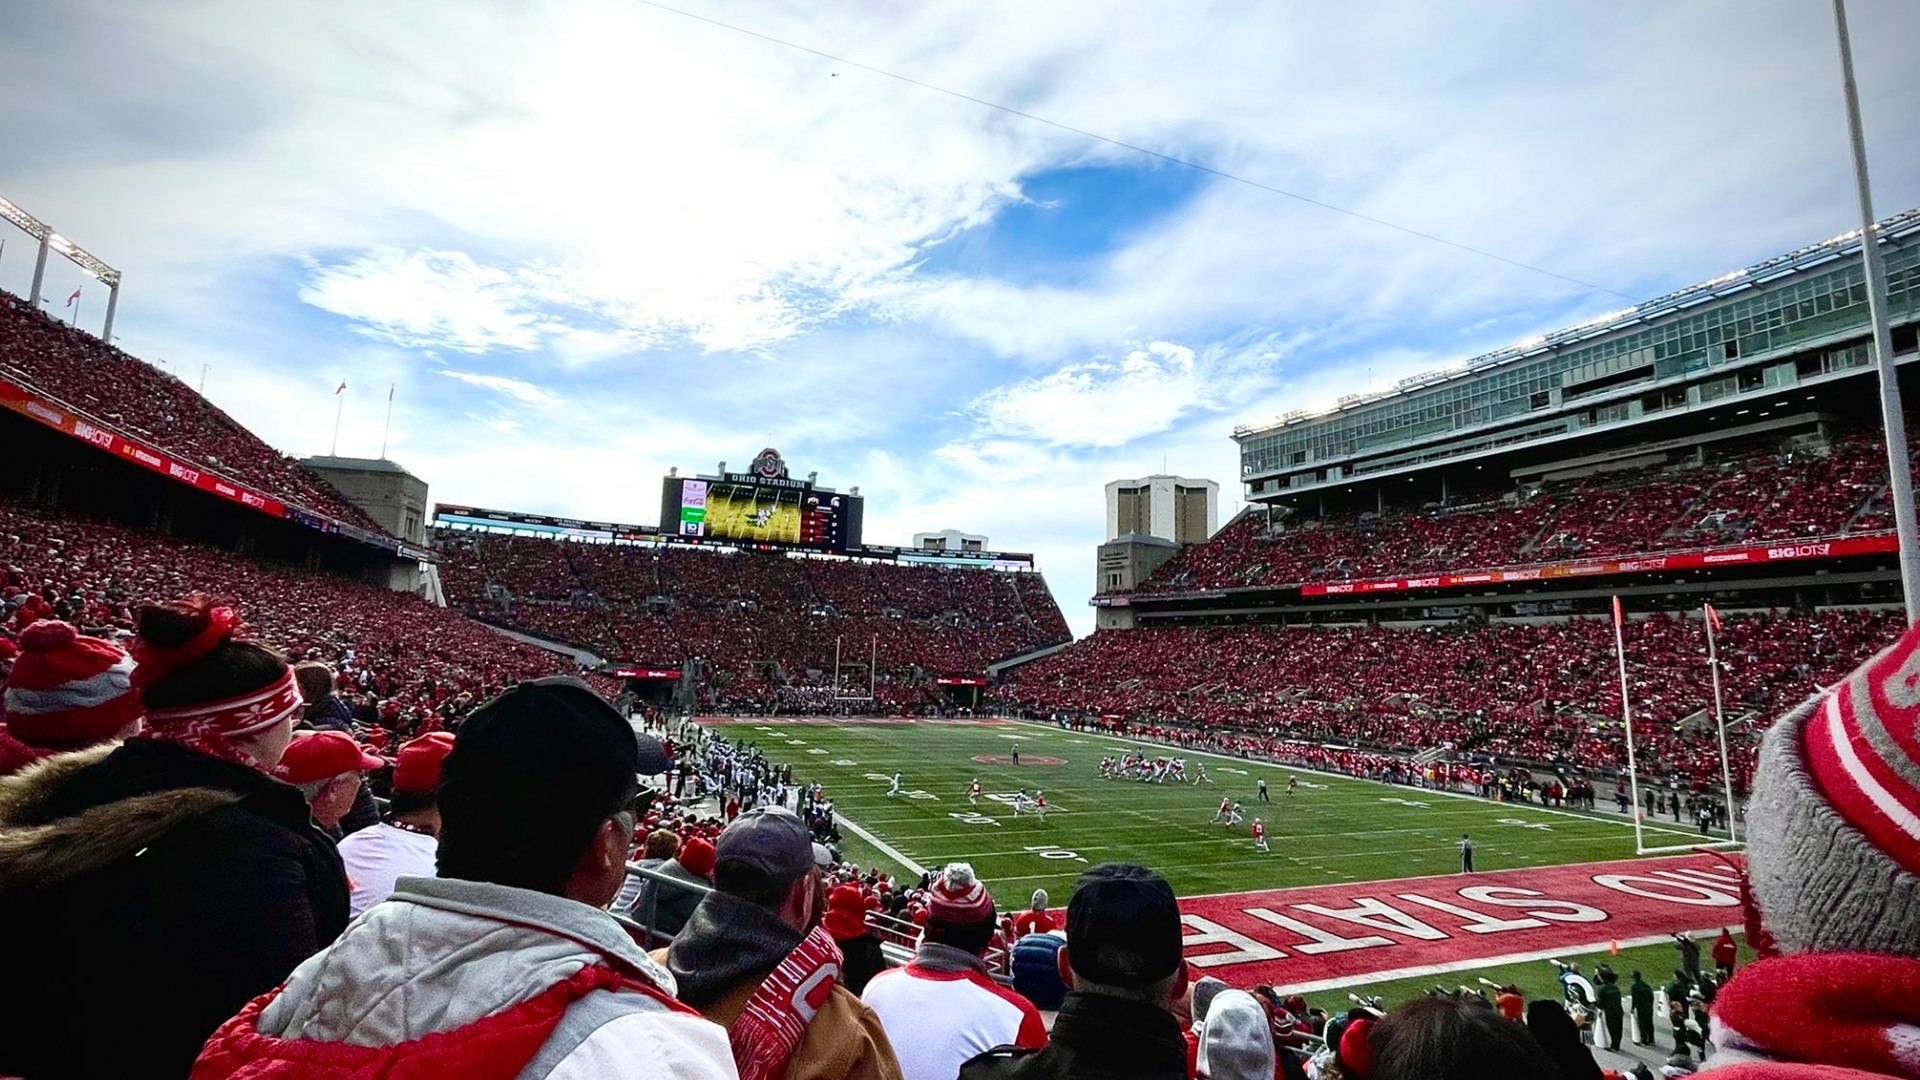 Amid the enthusiasm for college football, the risk of becoming a ticket scam victim looms each season.